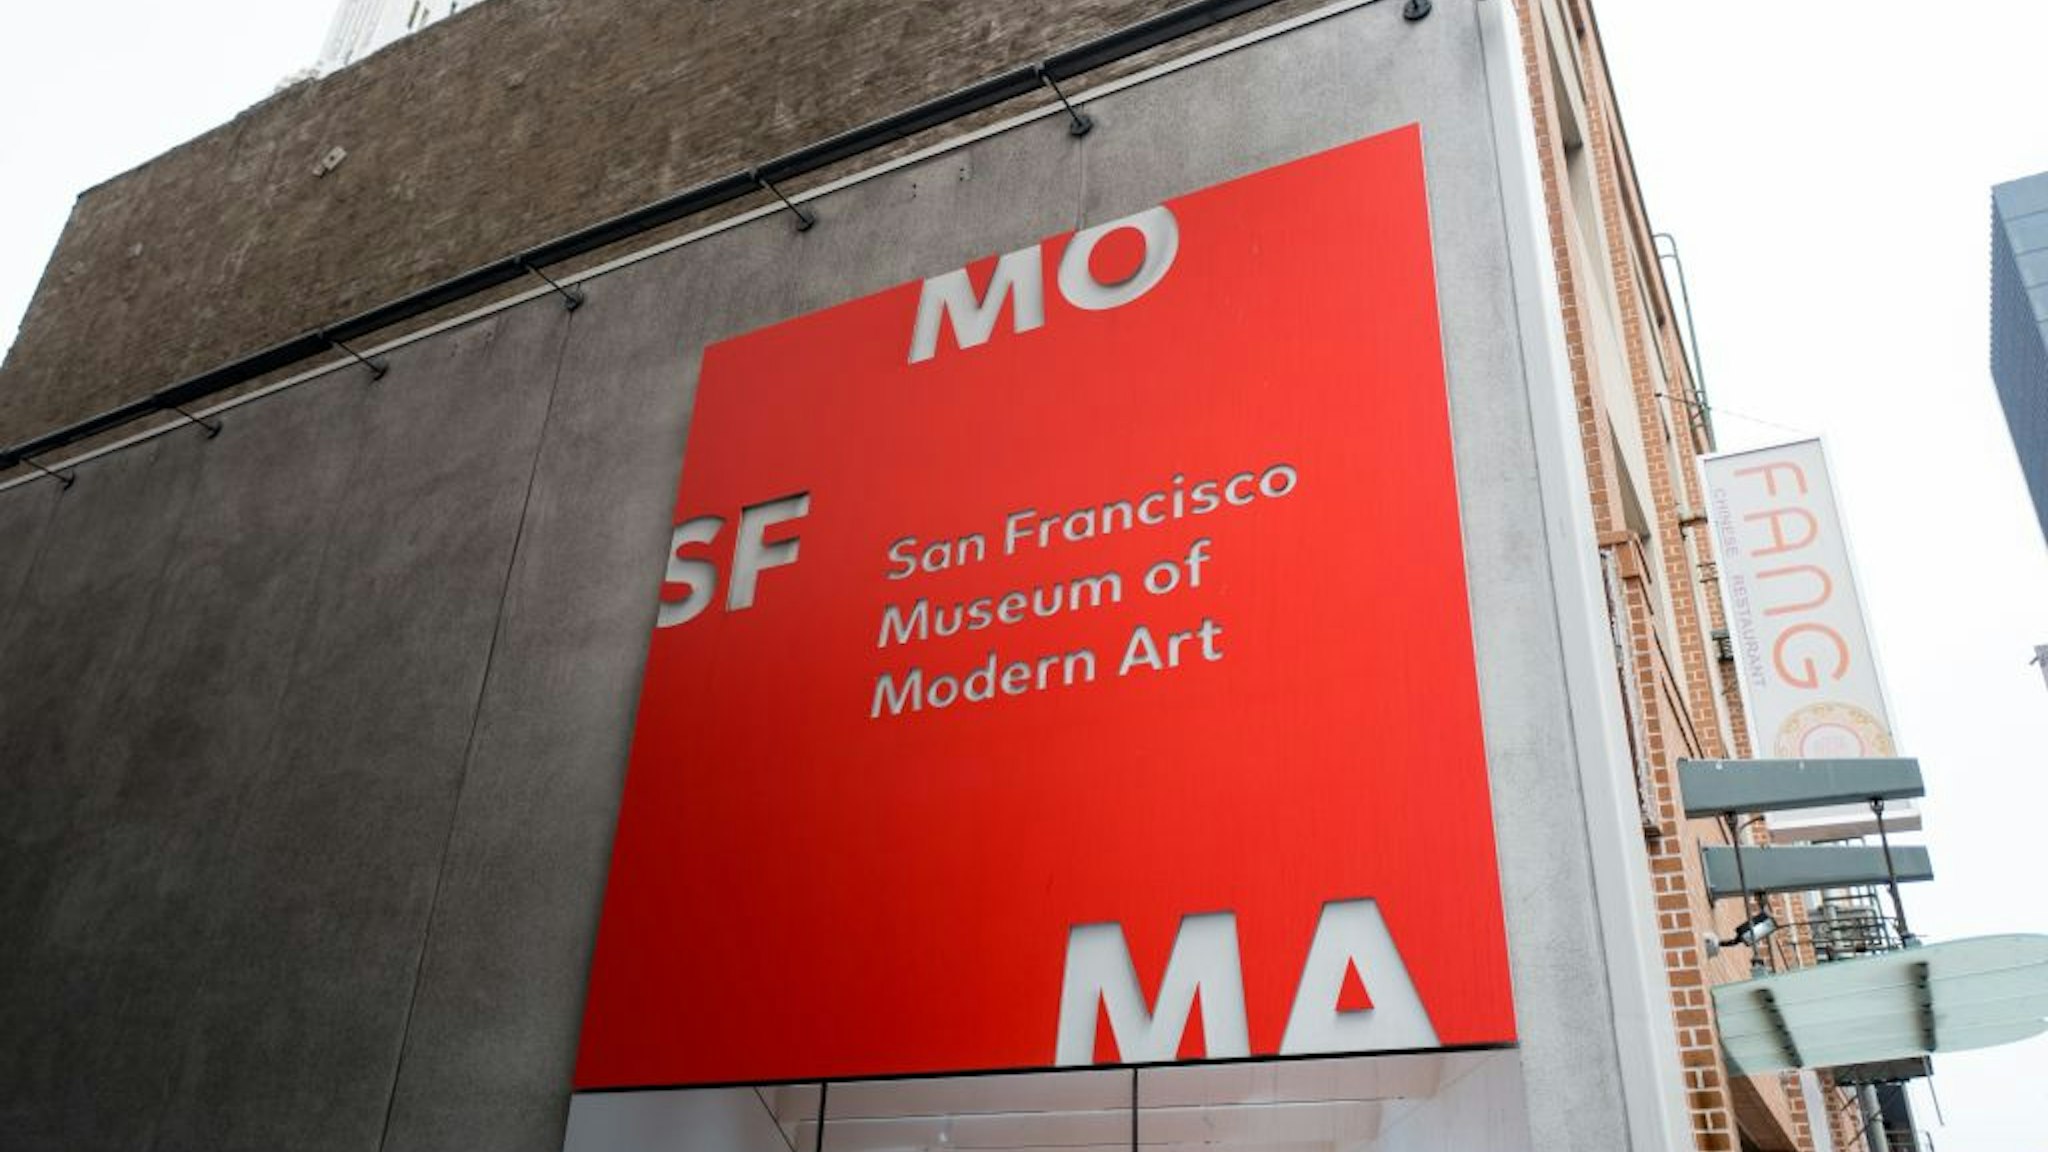 Bright red sign for the San Francisco Museum of Modern Art